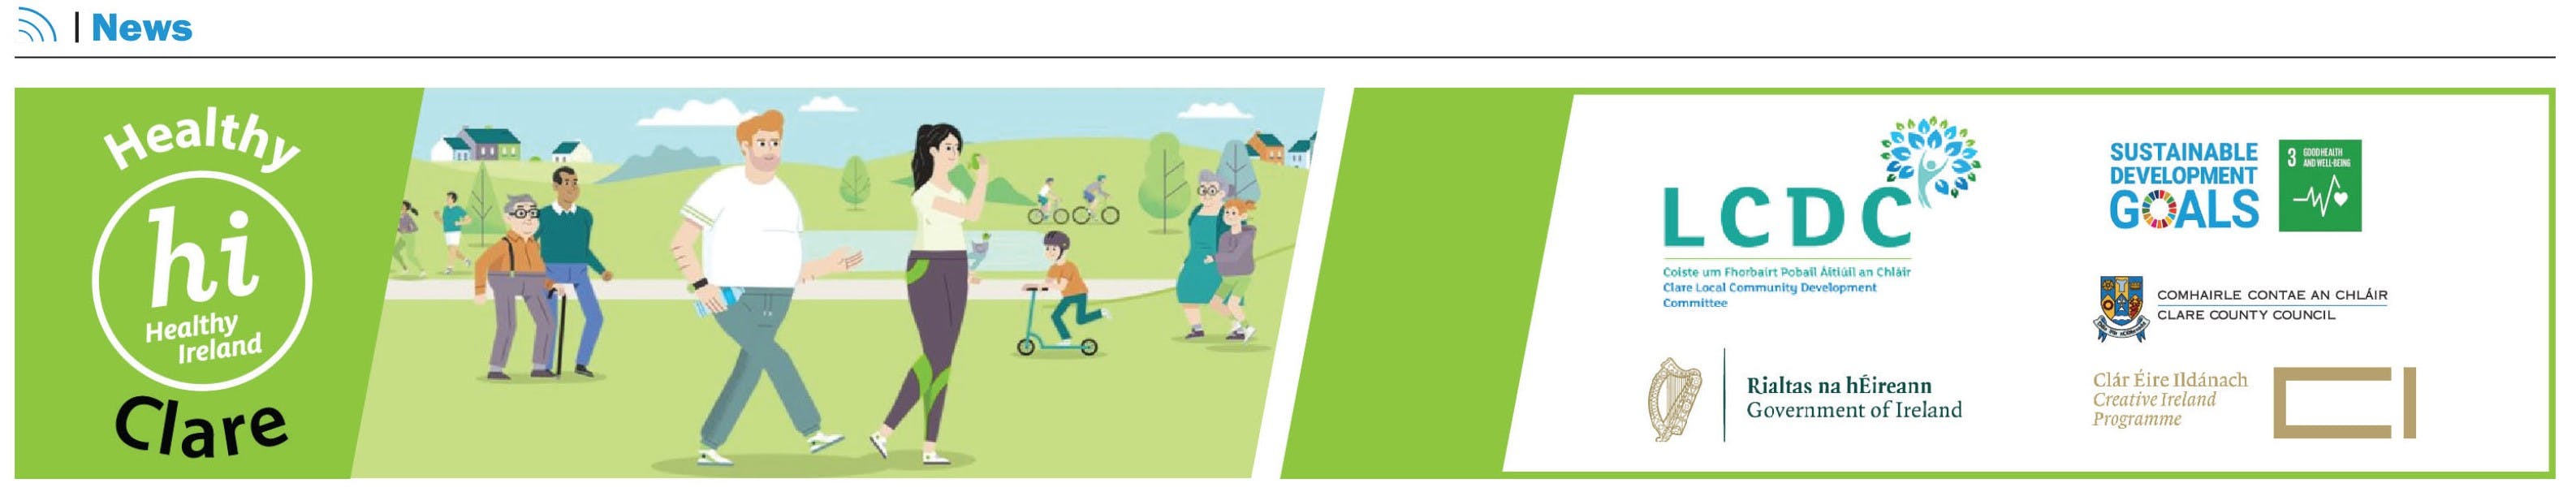 Healthy Clare Logo on the left with animated people moving through the park enjoying nature. Other logos on the right 